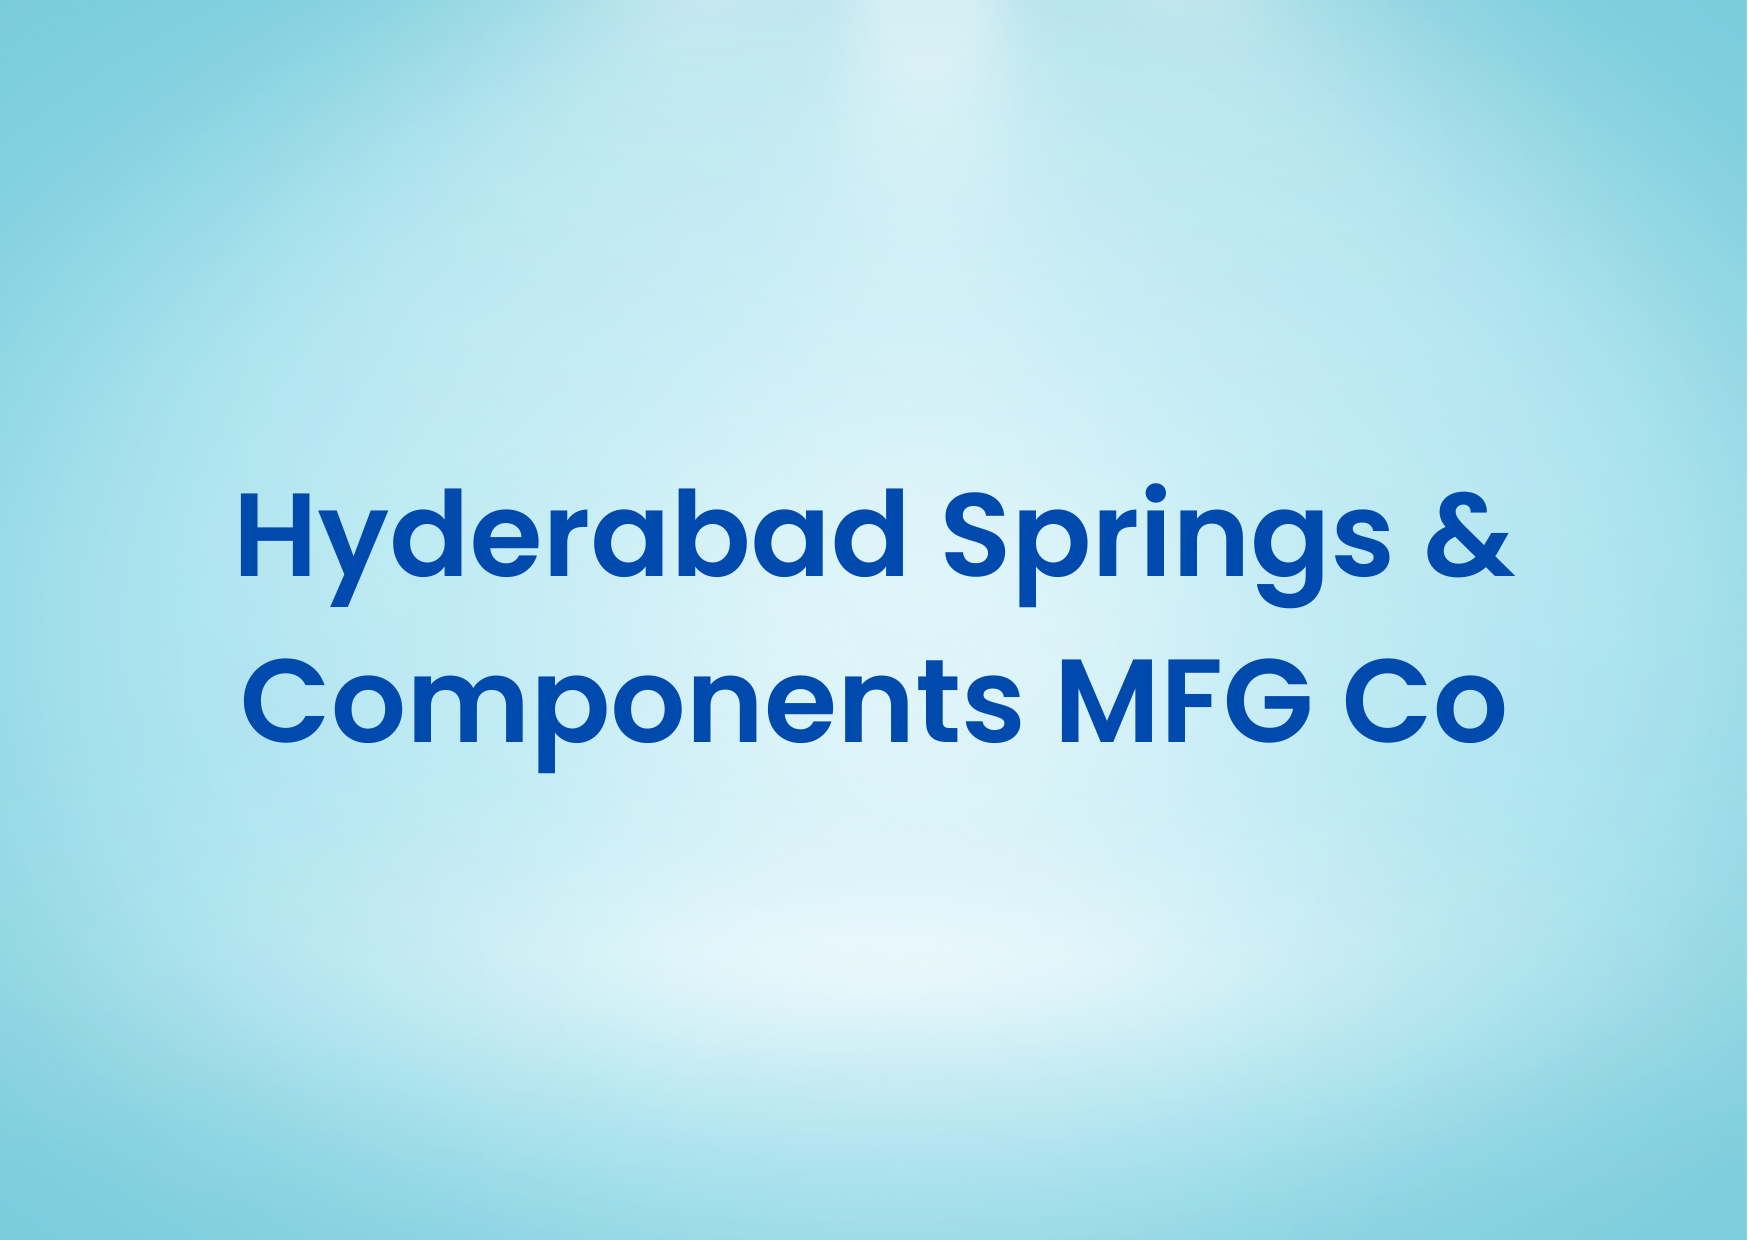 Hyderabad Springs & Components MFG Co 